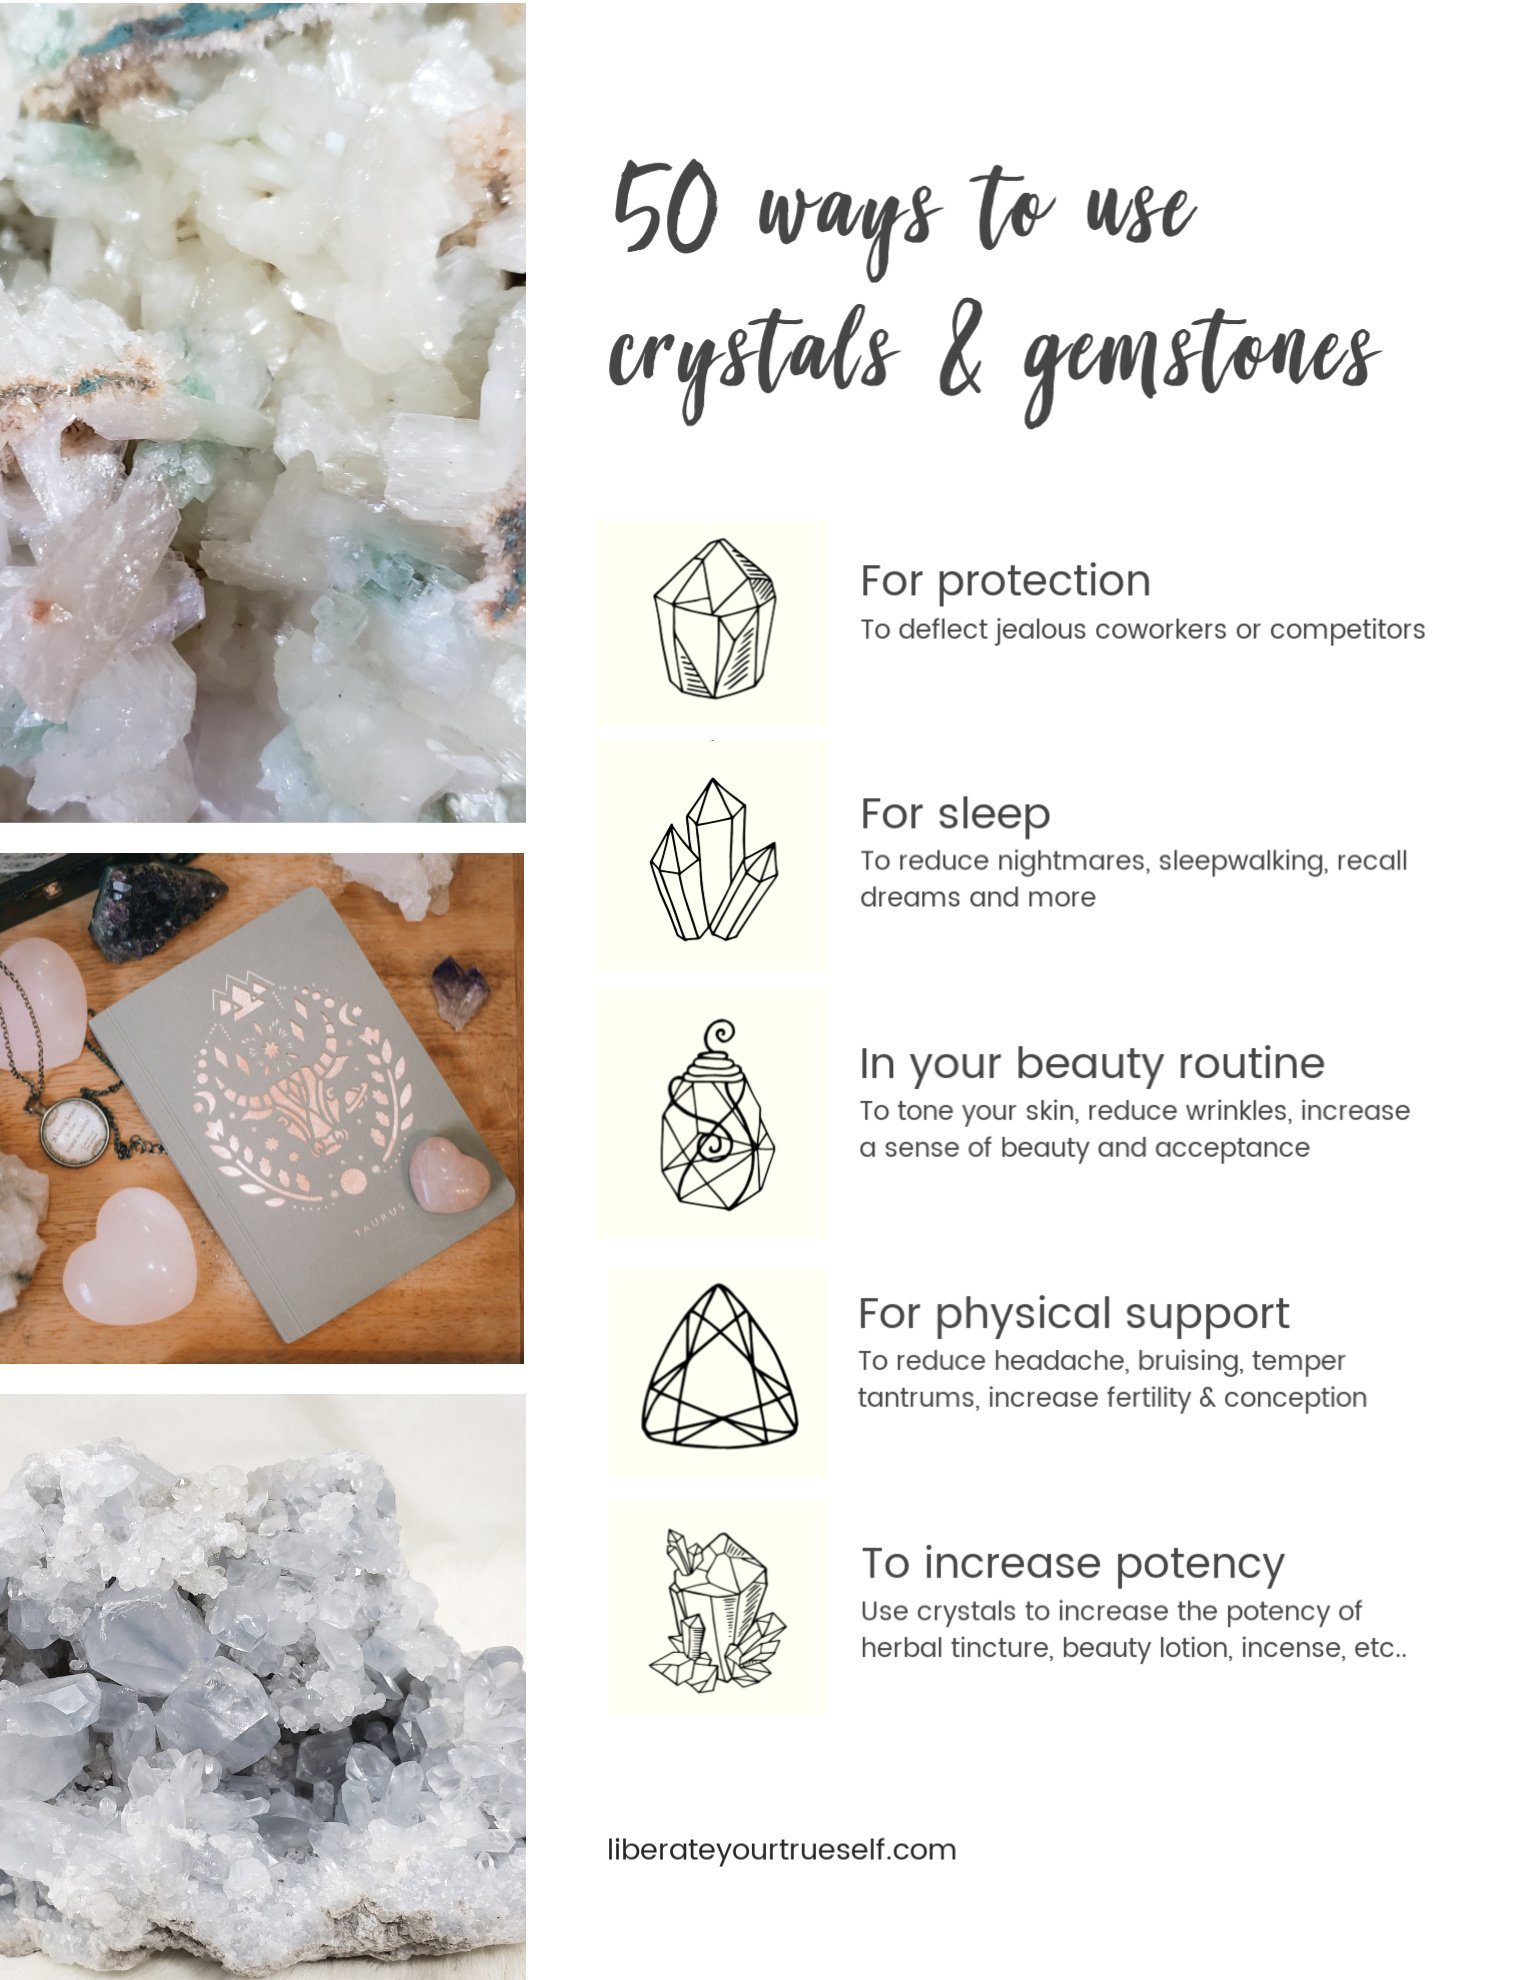 50 ways to use crystals